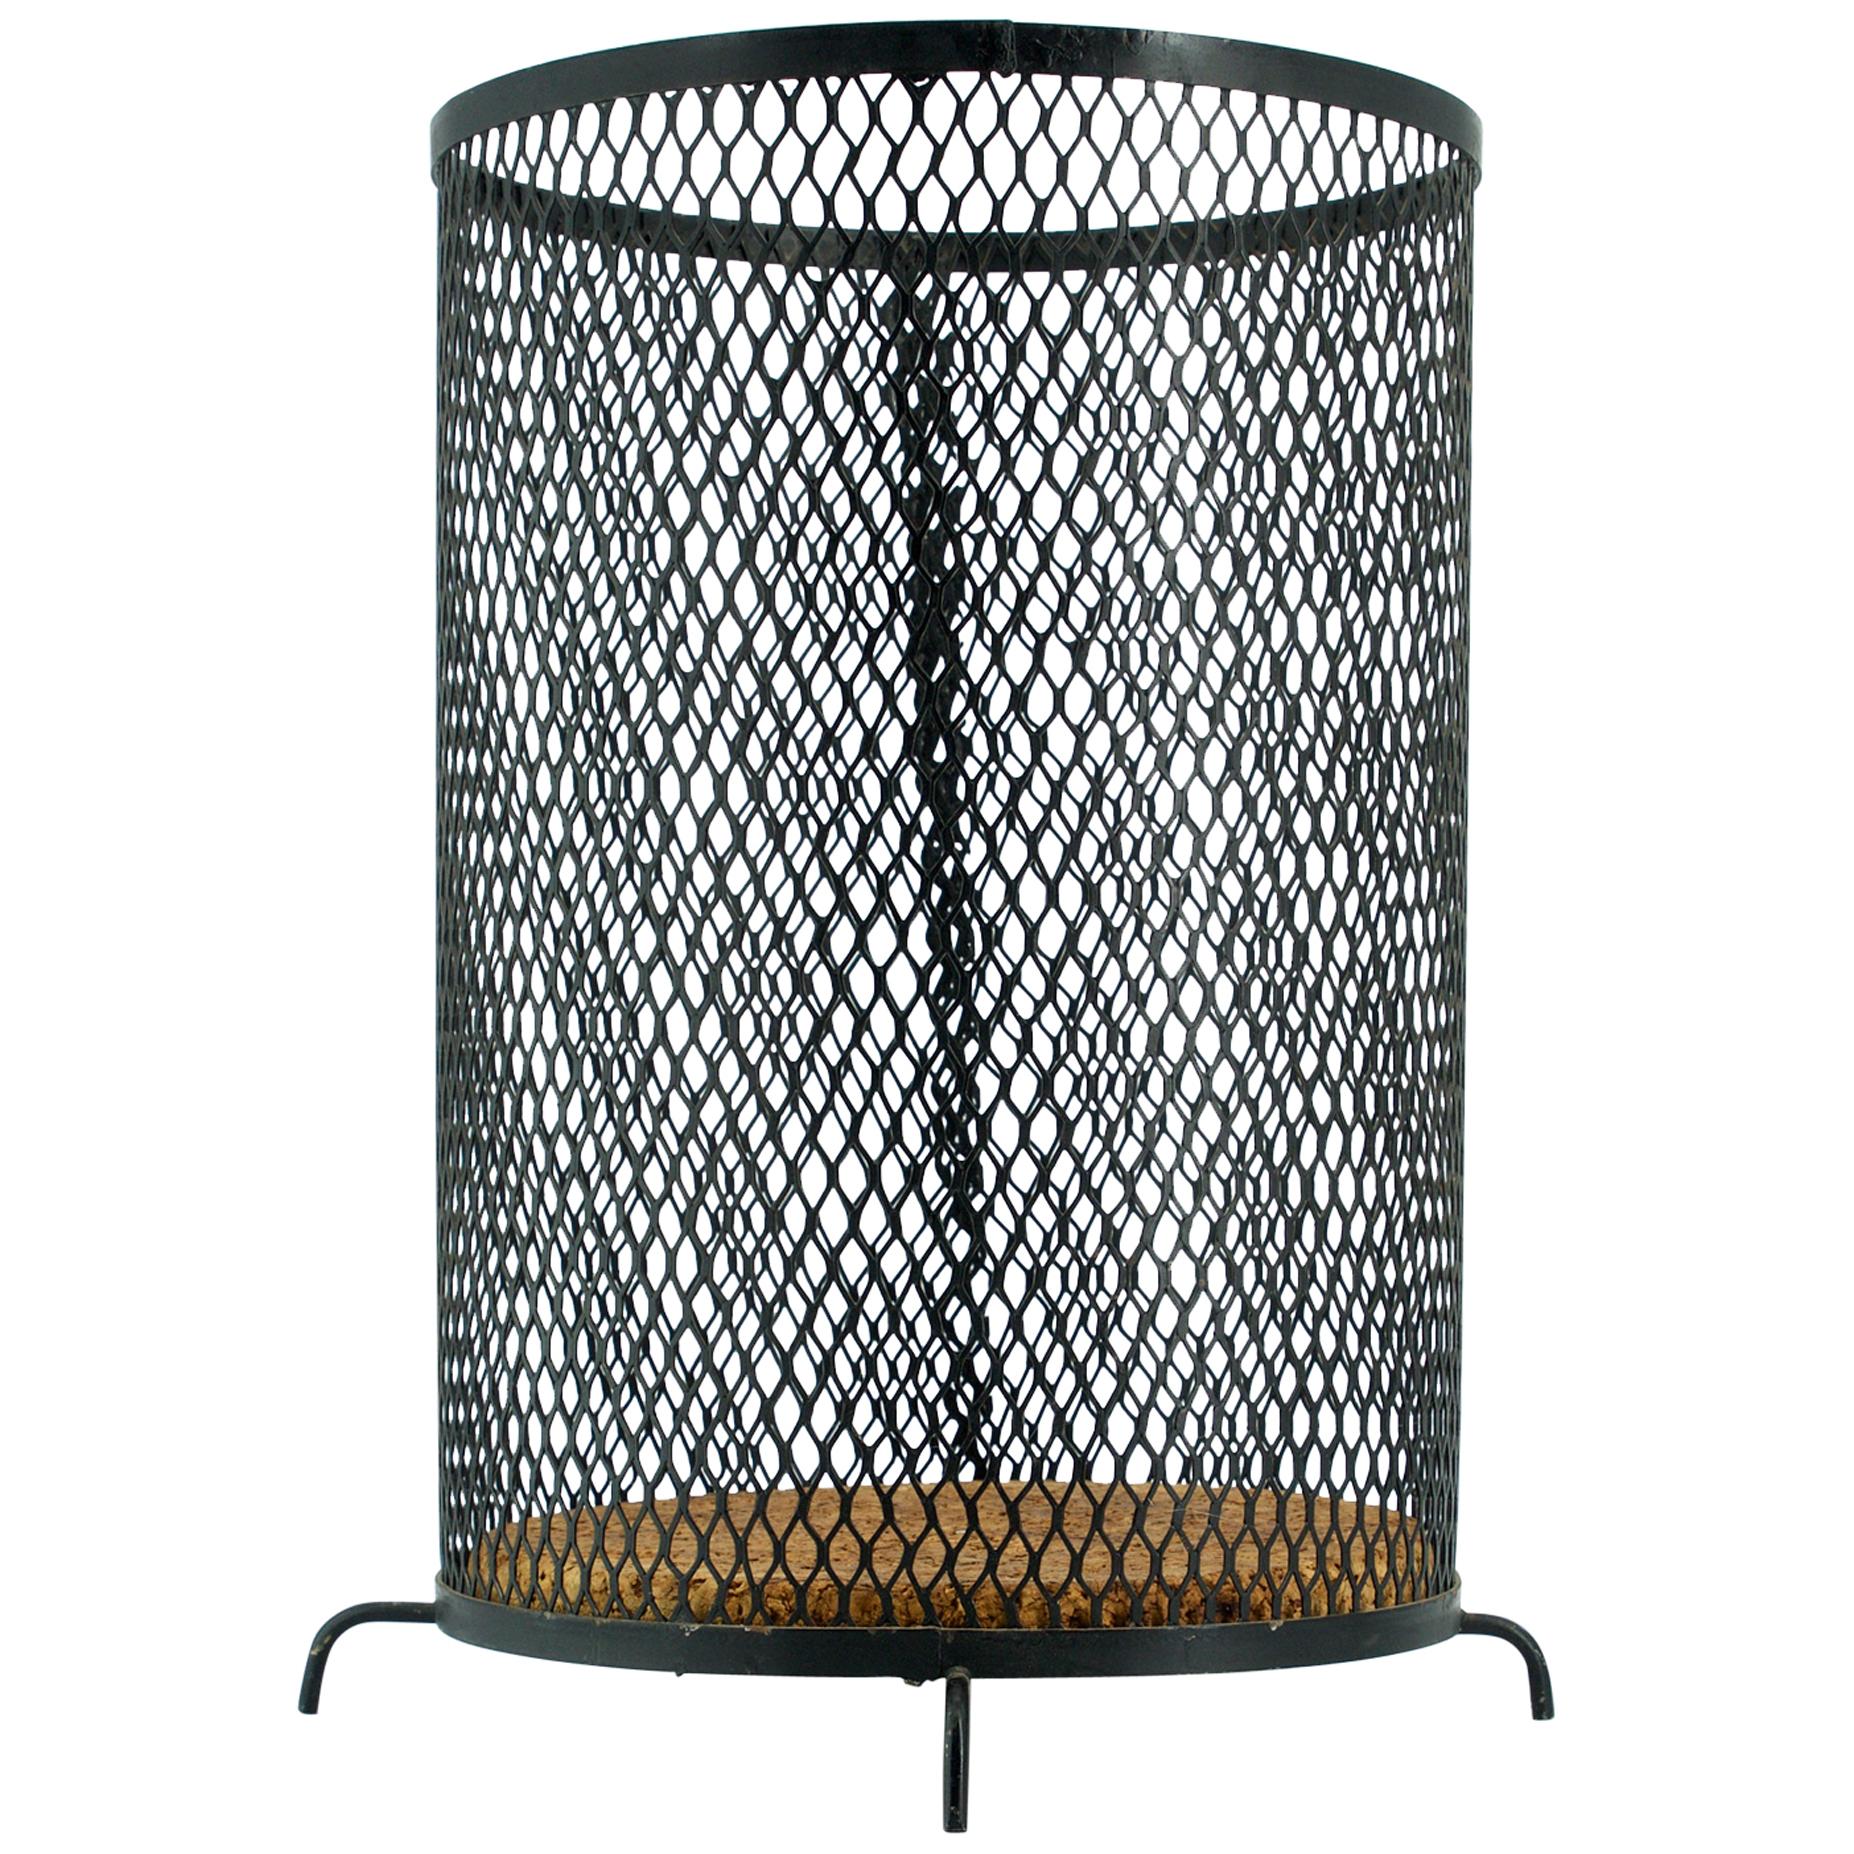 1950s Expanded Metal Blueprint Basket Paper Wastebasket Style of George Nelson